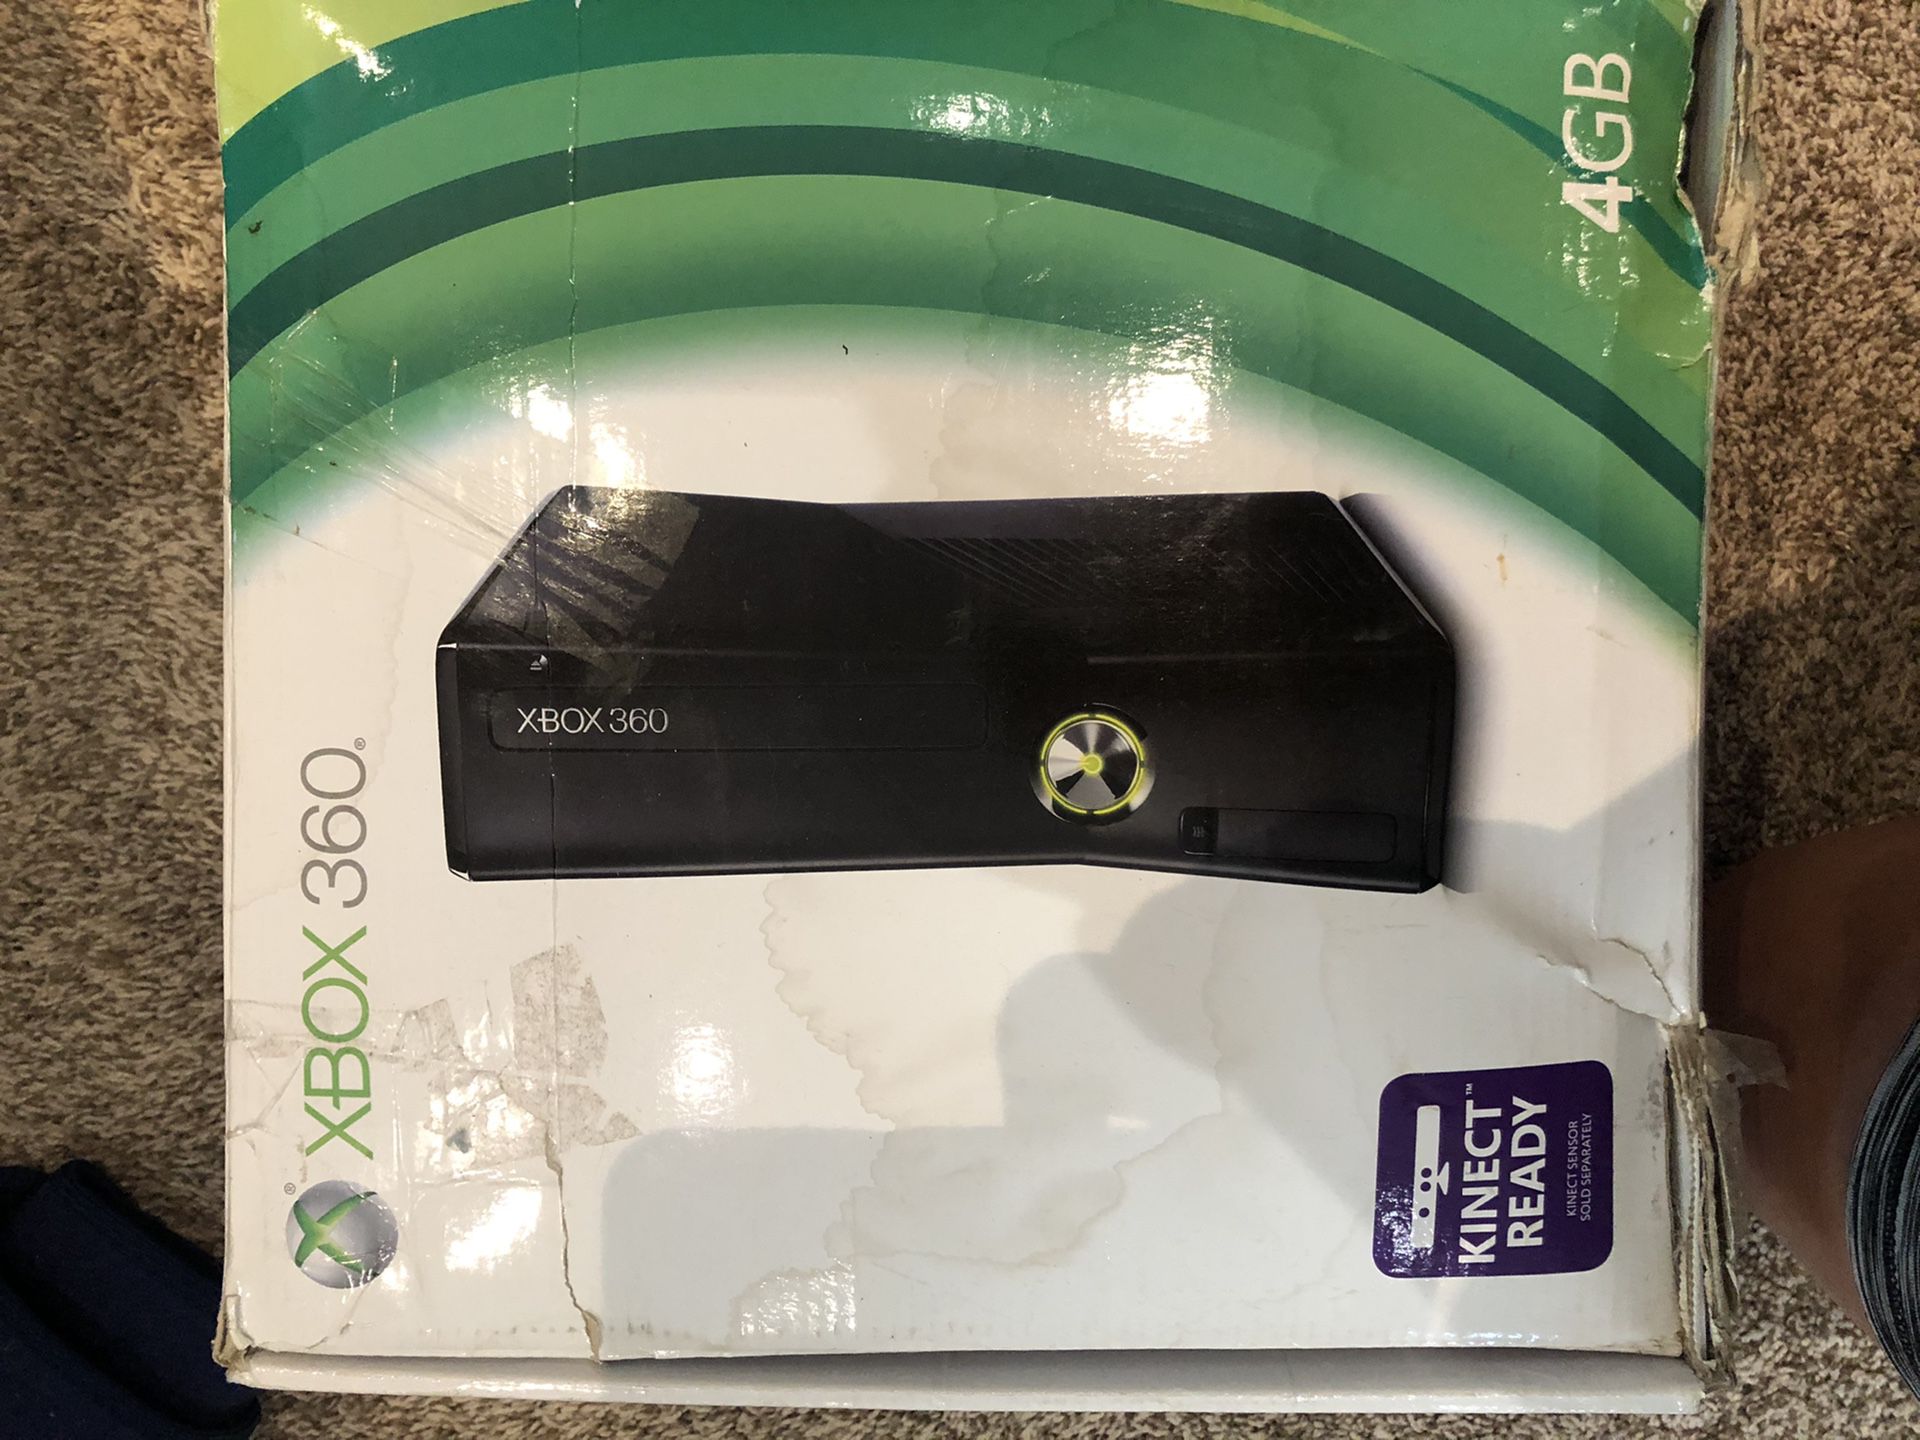 X Box 360 console unused missing controllers.